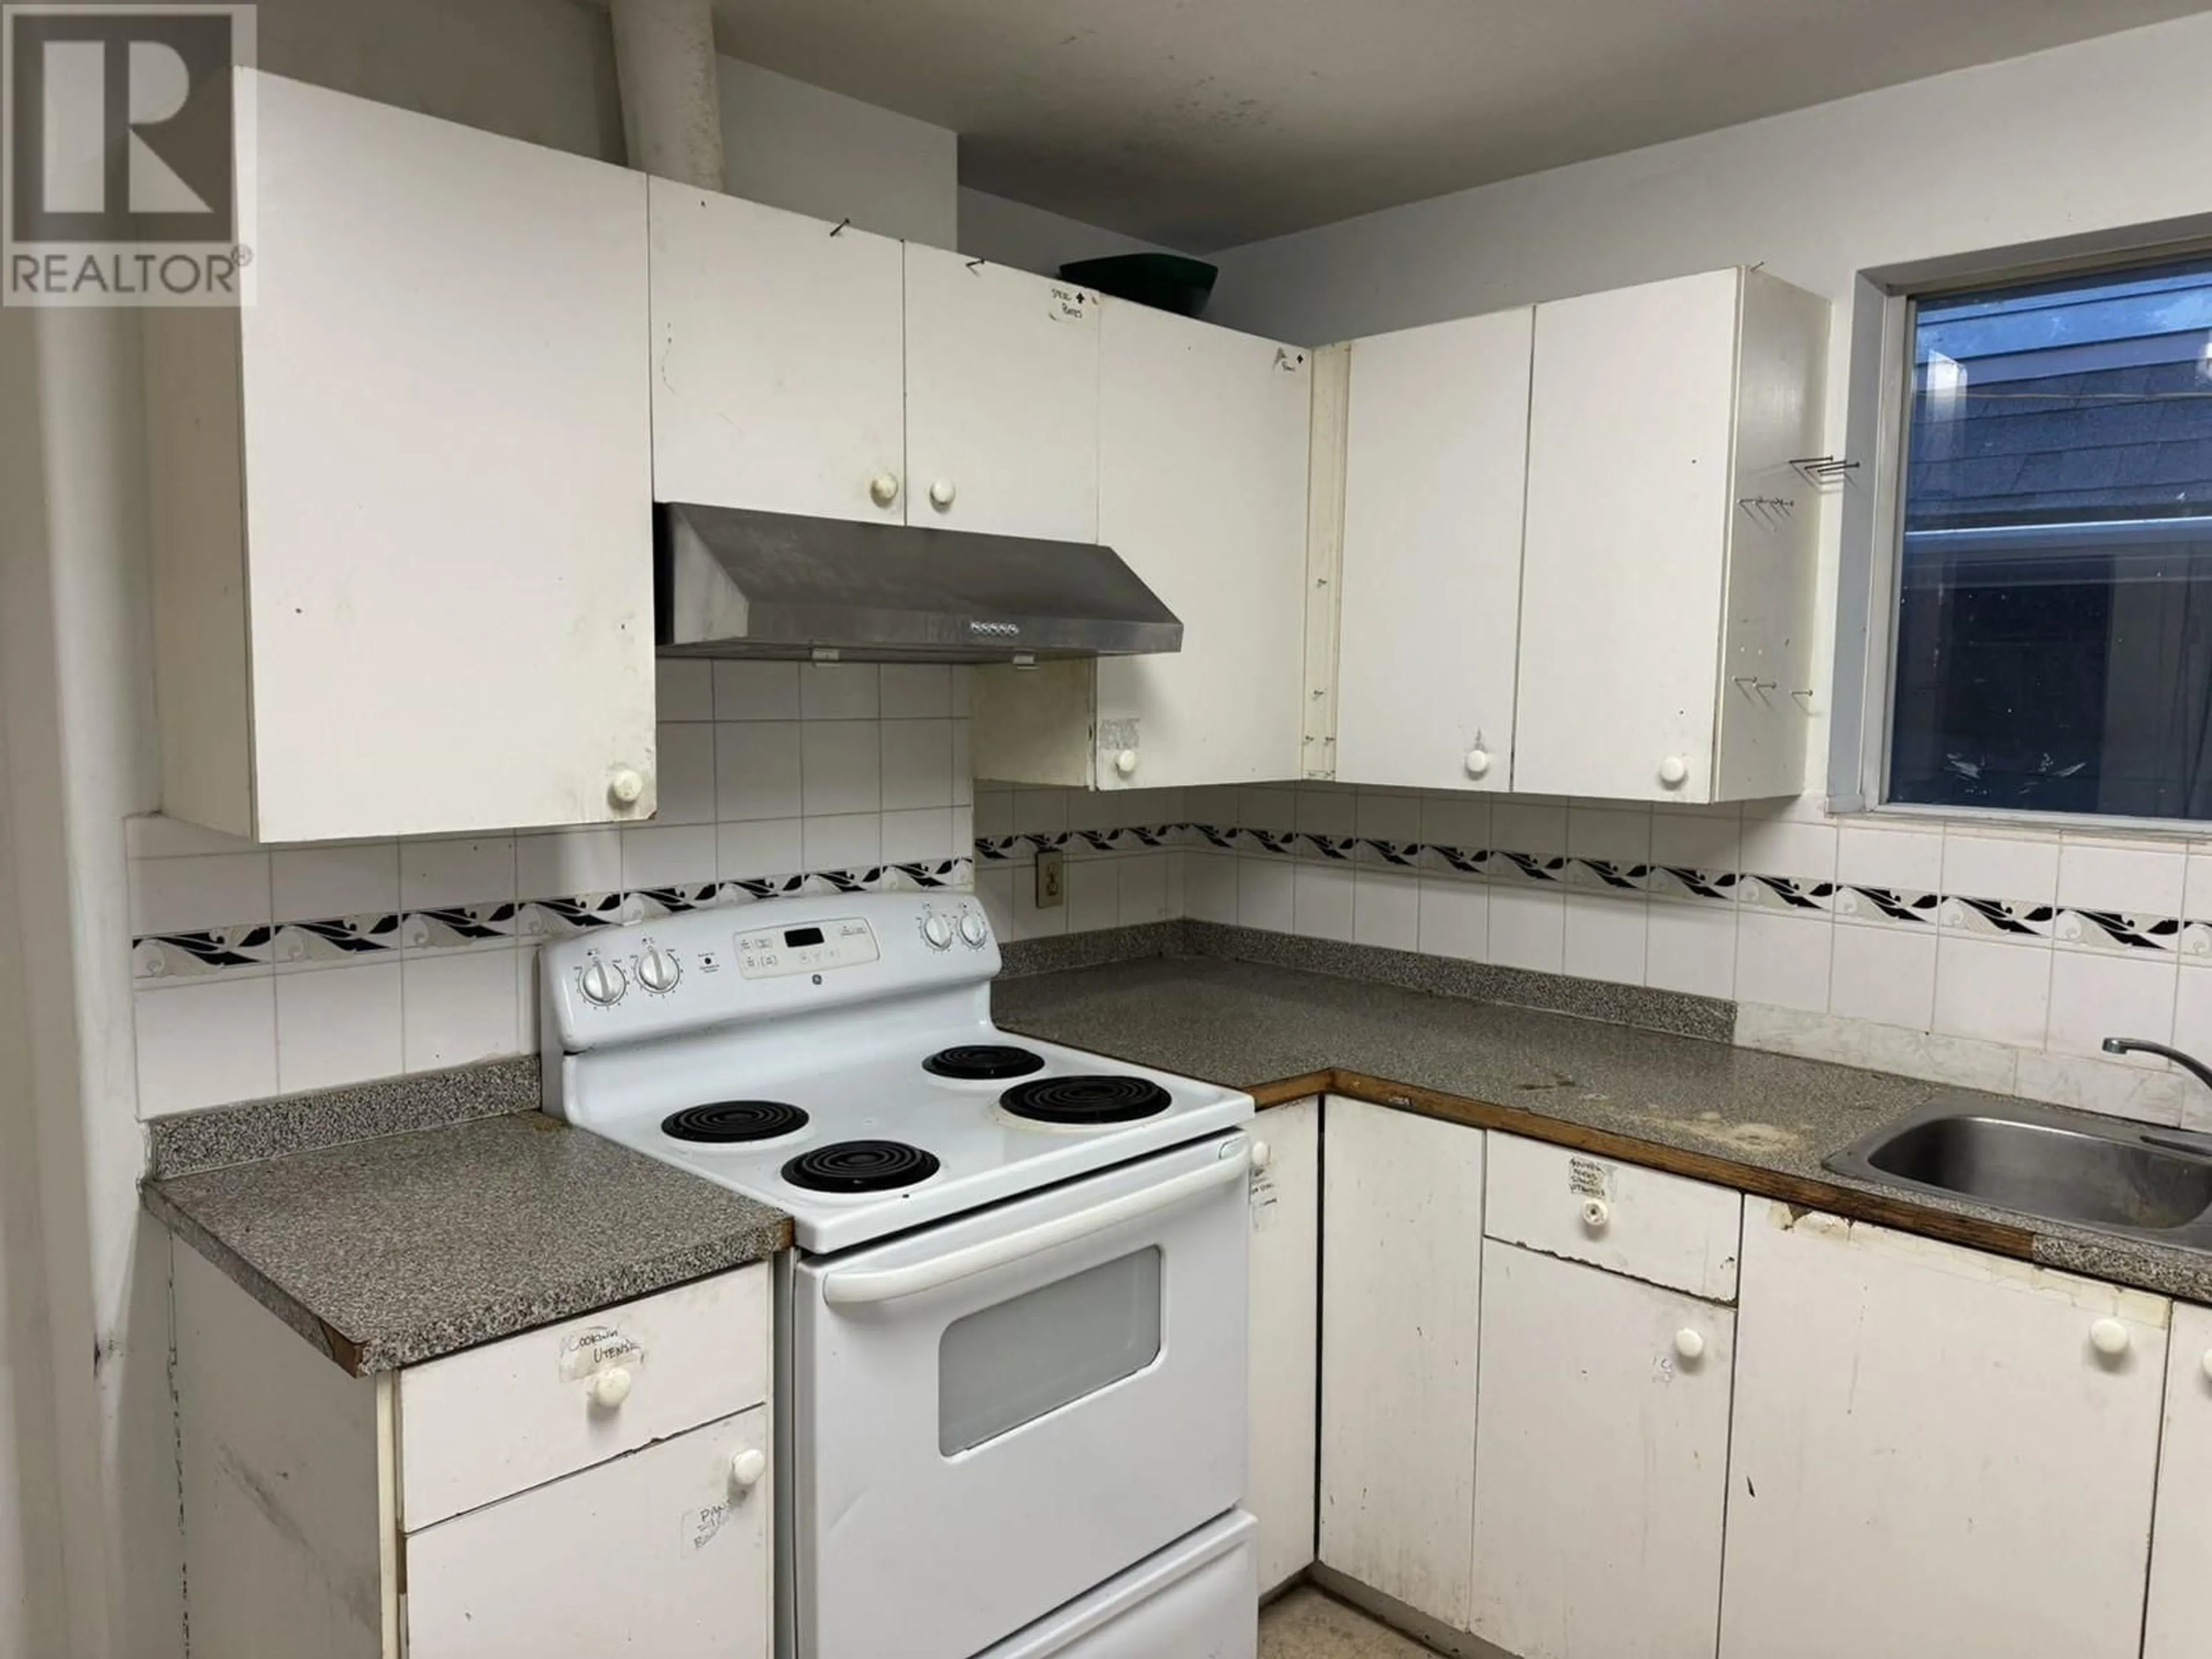 Standard kitchen for 4050 PERRY STREET, Vancouver British Columbia V5N3X3